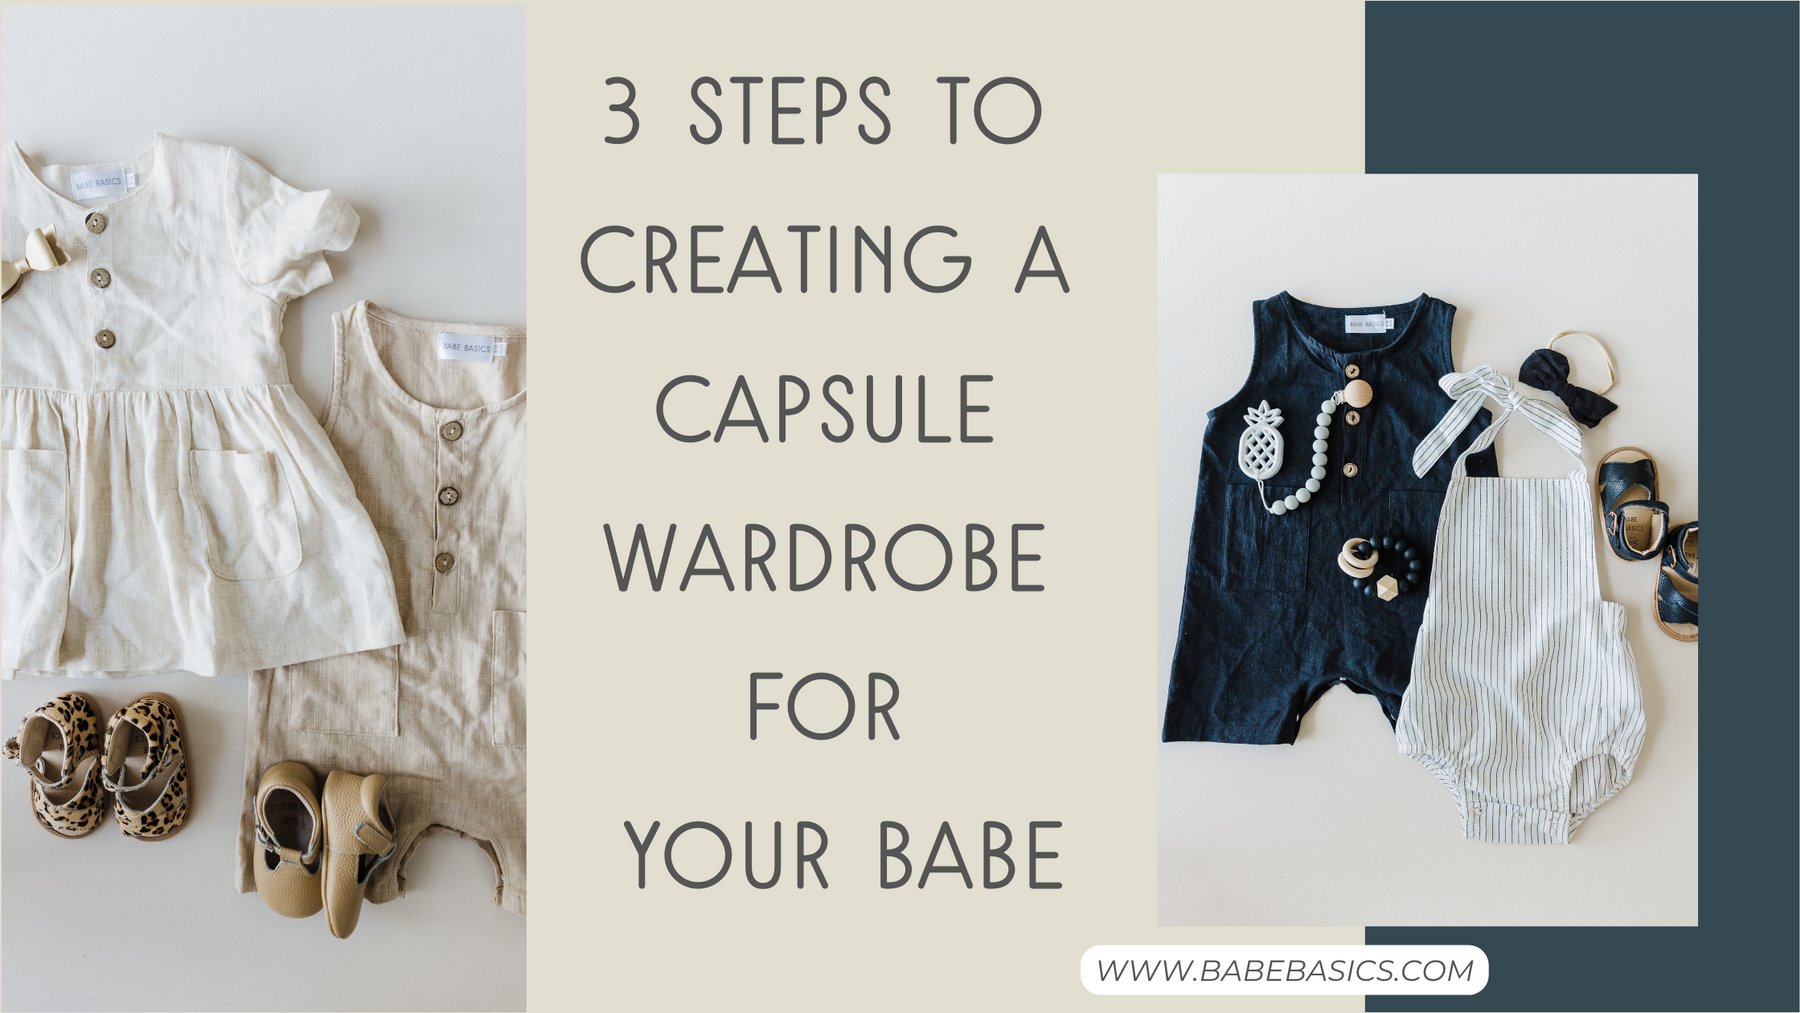 3 Steps to Creating a Capsule Wardrobe for Your Babe